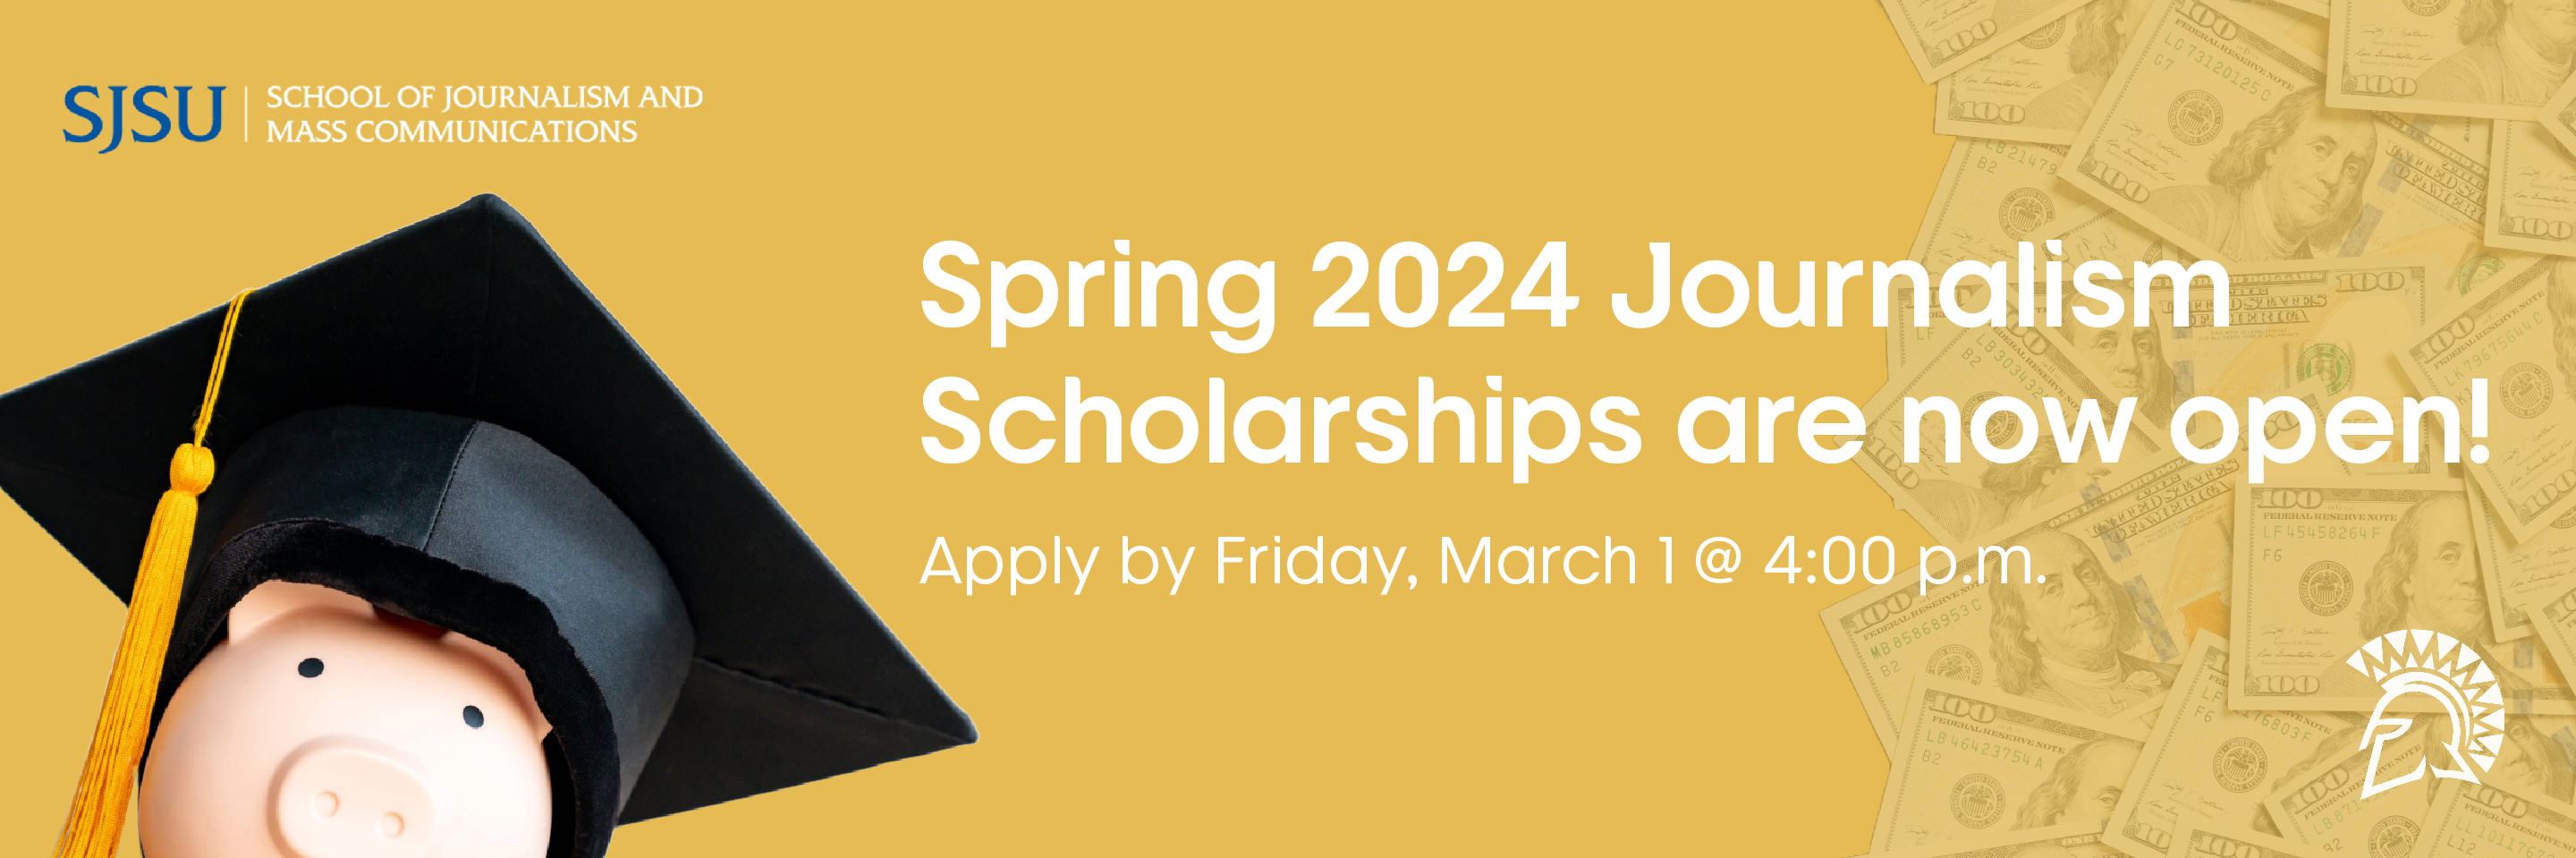 Spring 2024 Journalism Scholarships are now open! Apply by Friday, March 1 at 4:00 p.m.